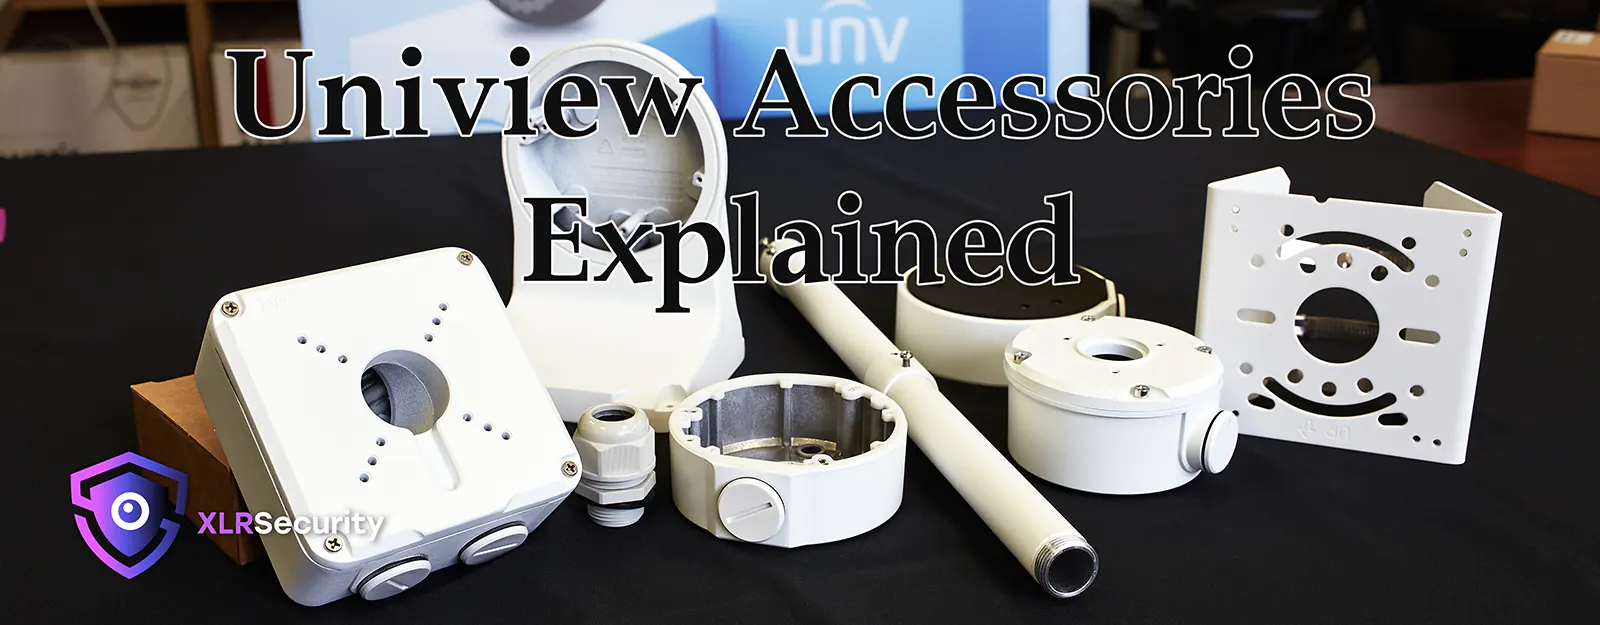 You are currently viewing Uniview IP Camera Accessories Explained